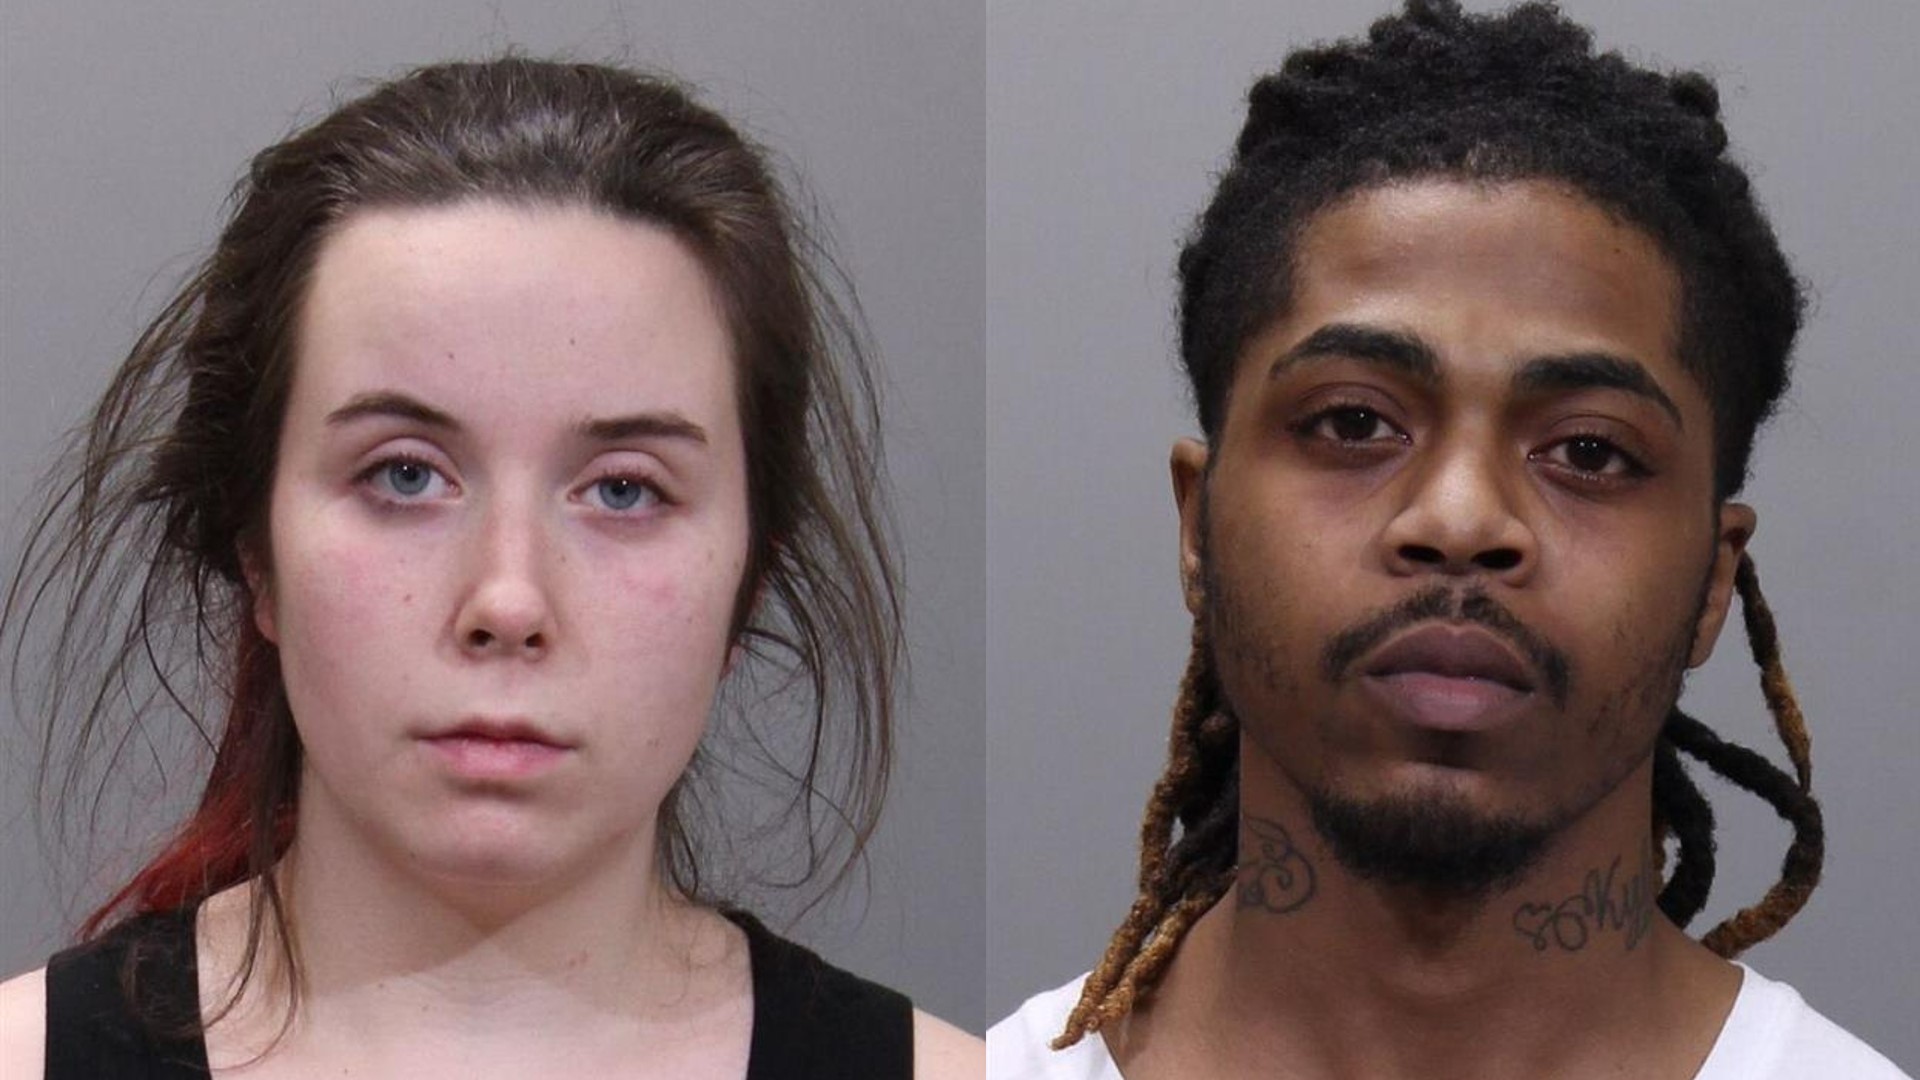 Columbus police issued an arrest warrant for 23-year-old Savanna Dawson and 24-year-old Kyrios March Jr. on Wednesday. Both are charged with murder.